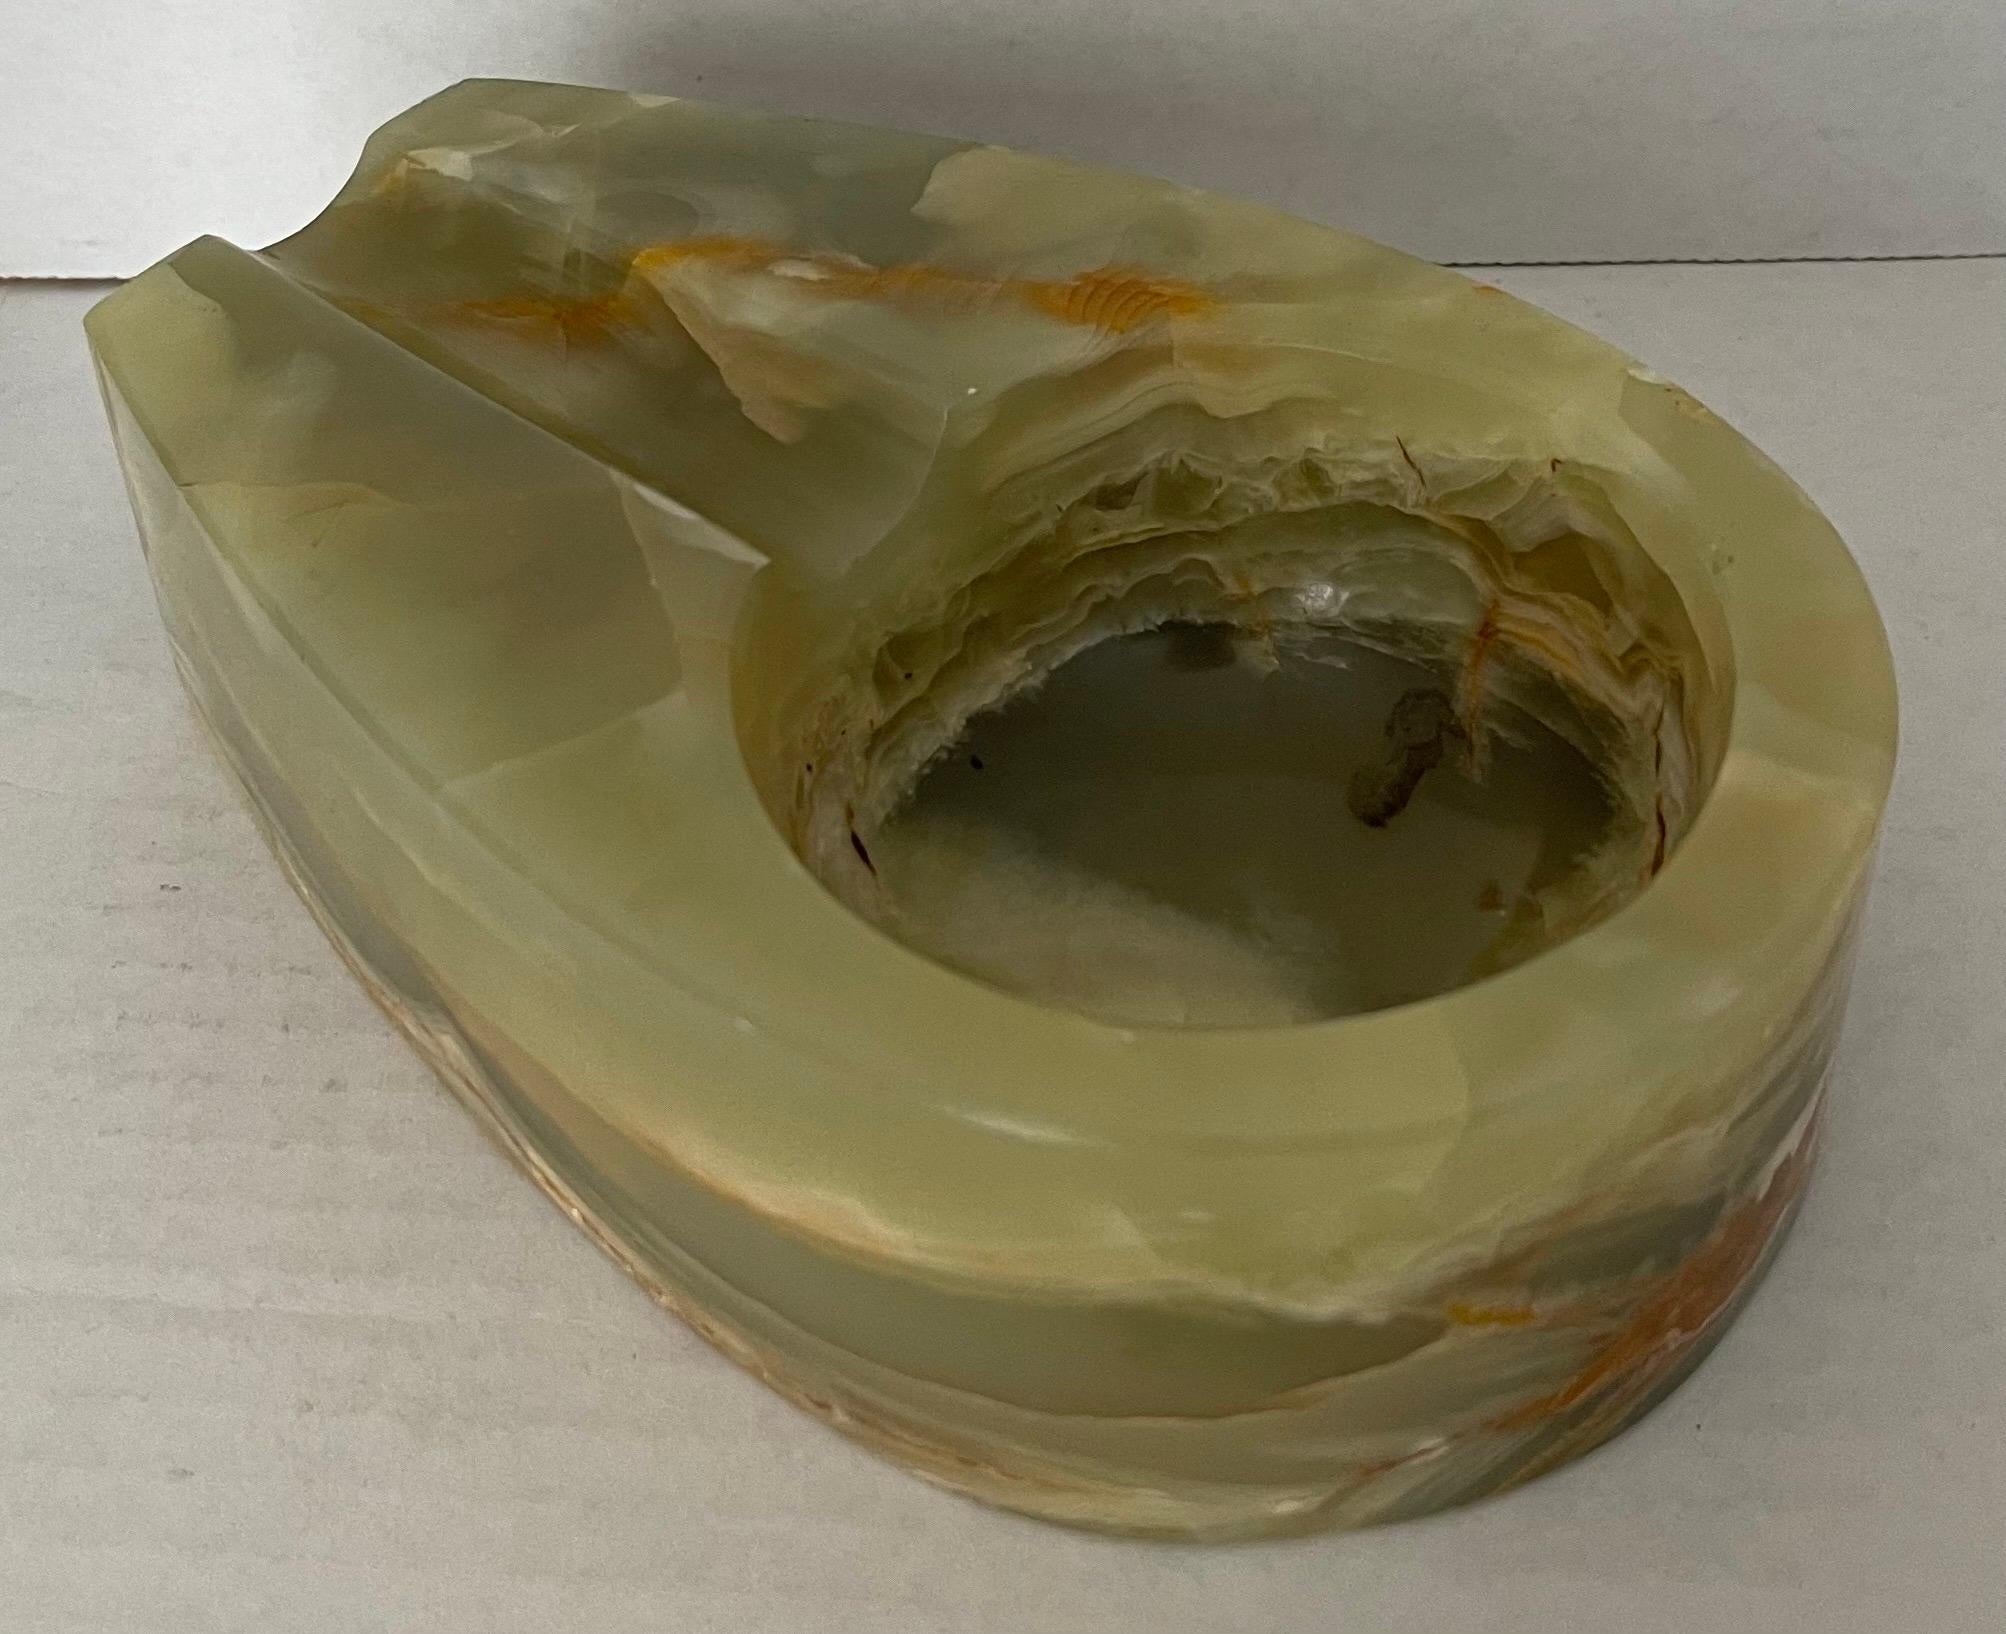 1970s pale green onyx cigar ashtray. Heavy, well made design featuring a richly veined piece of carved onyx. No makers mark or signature. 
No visible signs of wear or use.